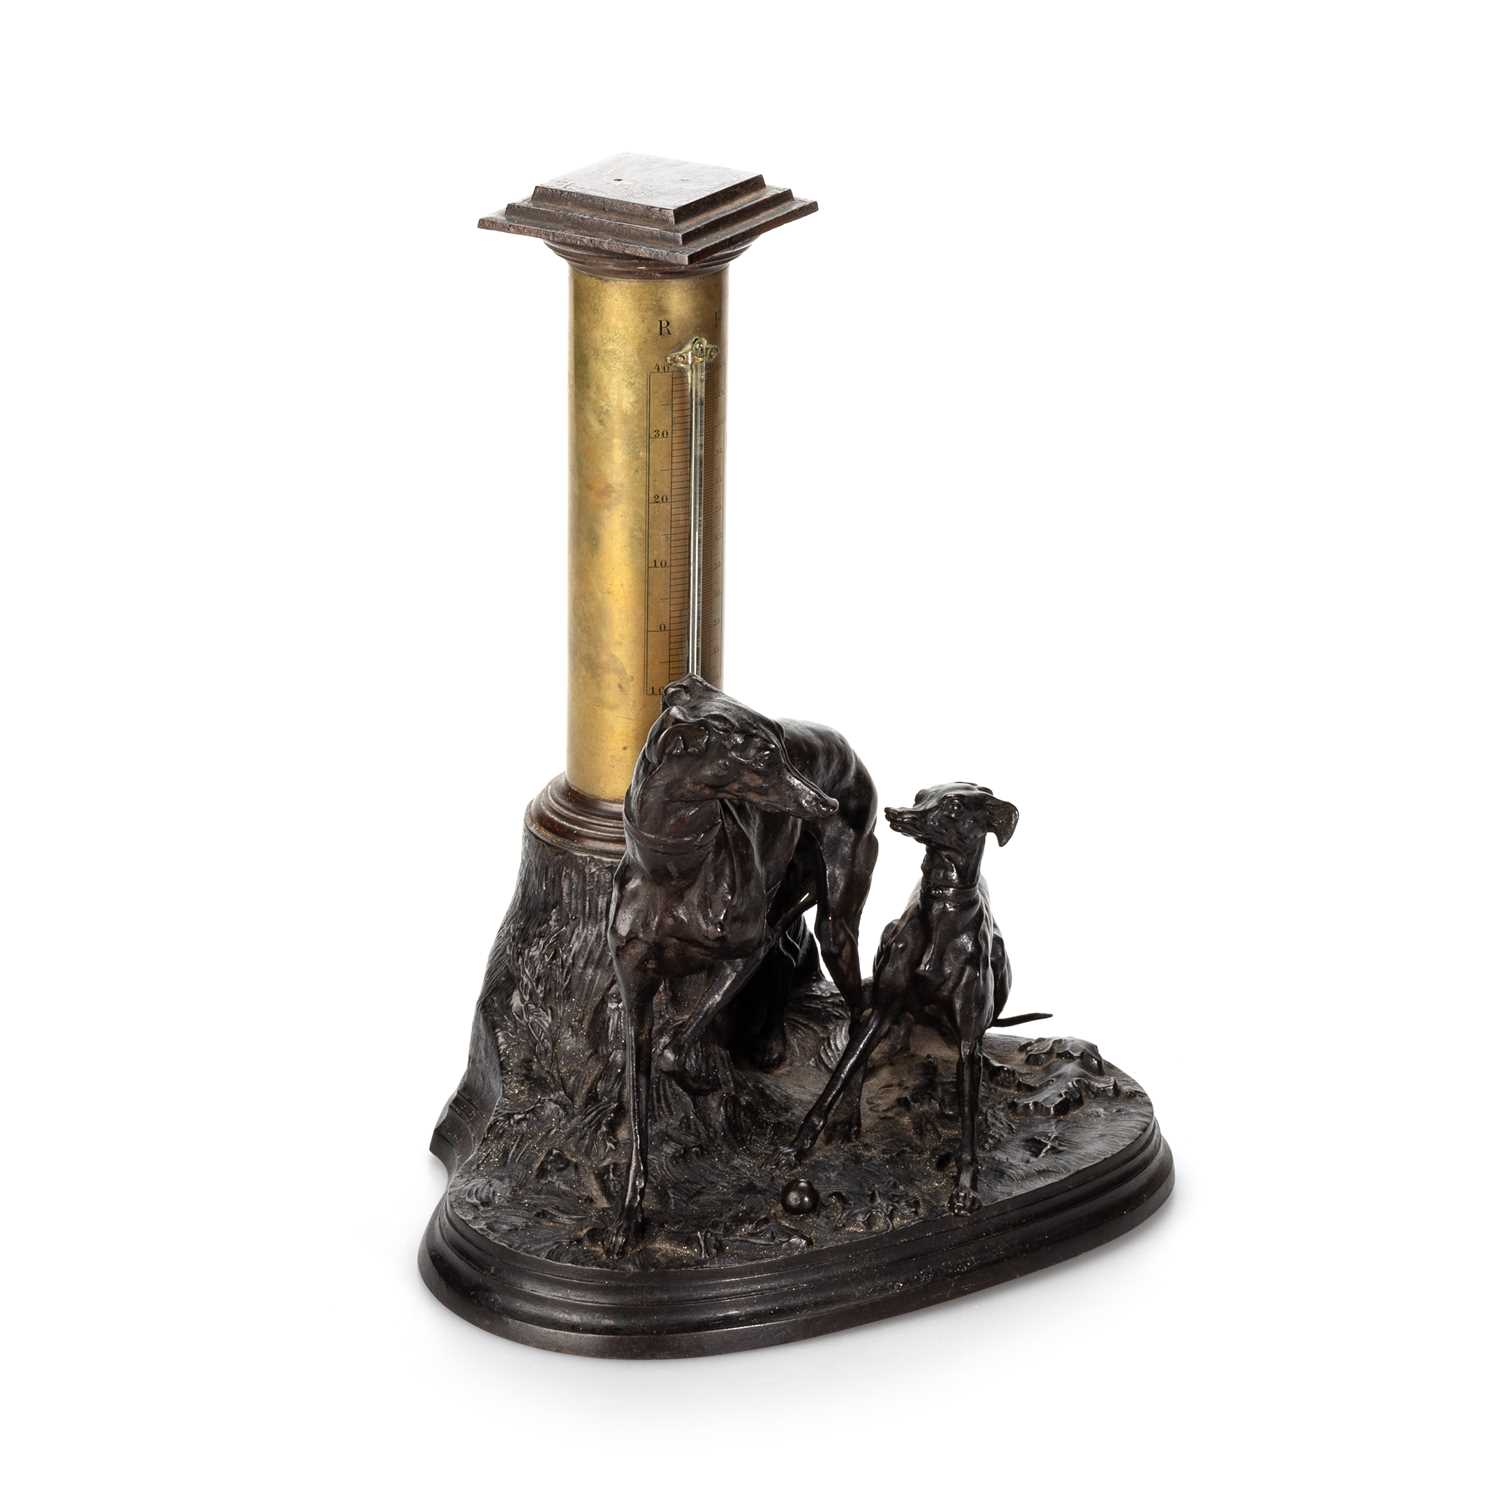 AFTER P.J. MÊNE, A BRONZE GROUP OF TWO GREYHOUNDS AND A THERMOMETER, LATE 19TH CENTURY - Image 2 of 3